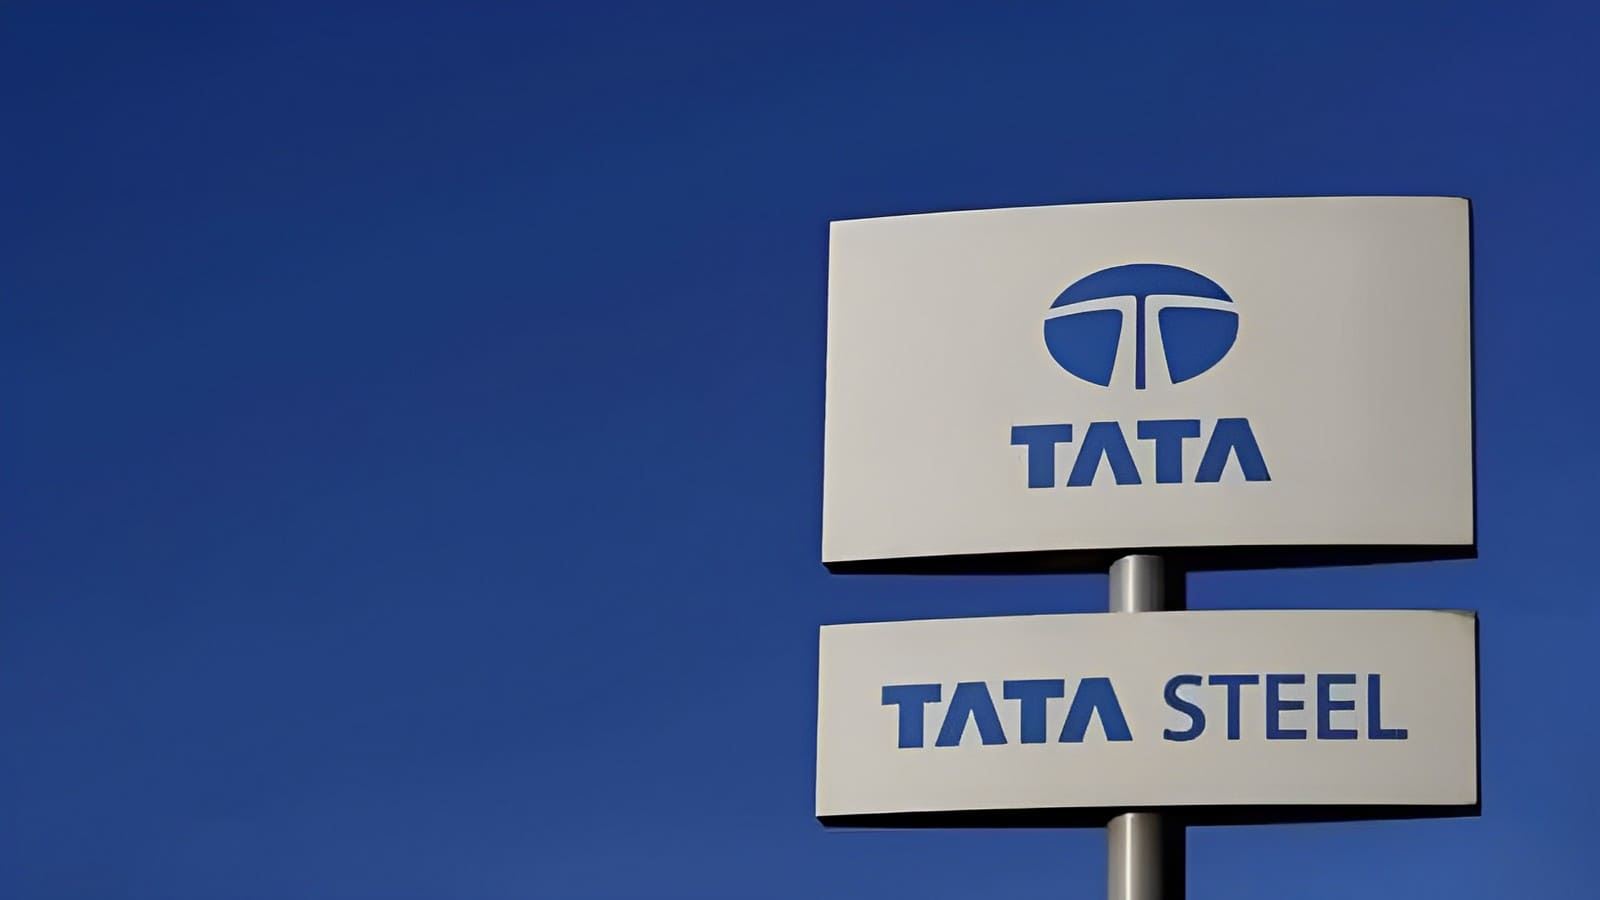 Decarbonisation of Tata Steel's UK plant expected to be completed within 3 years